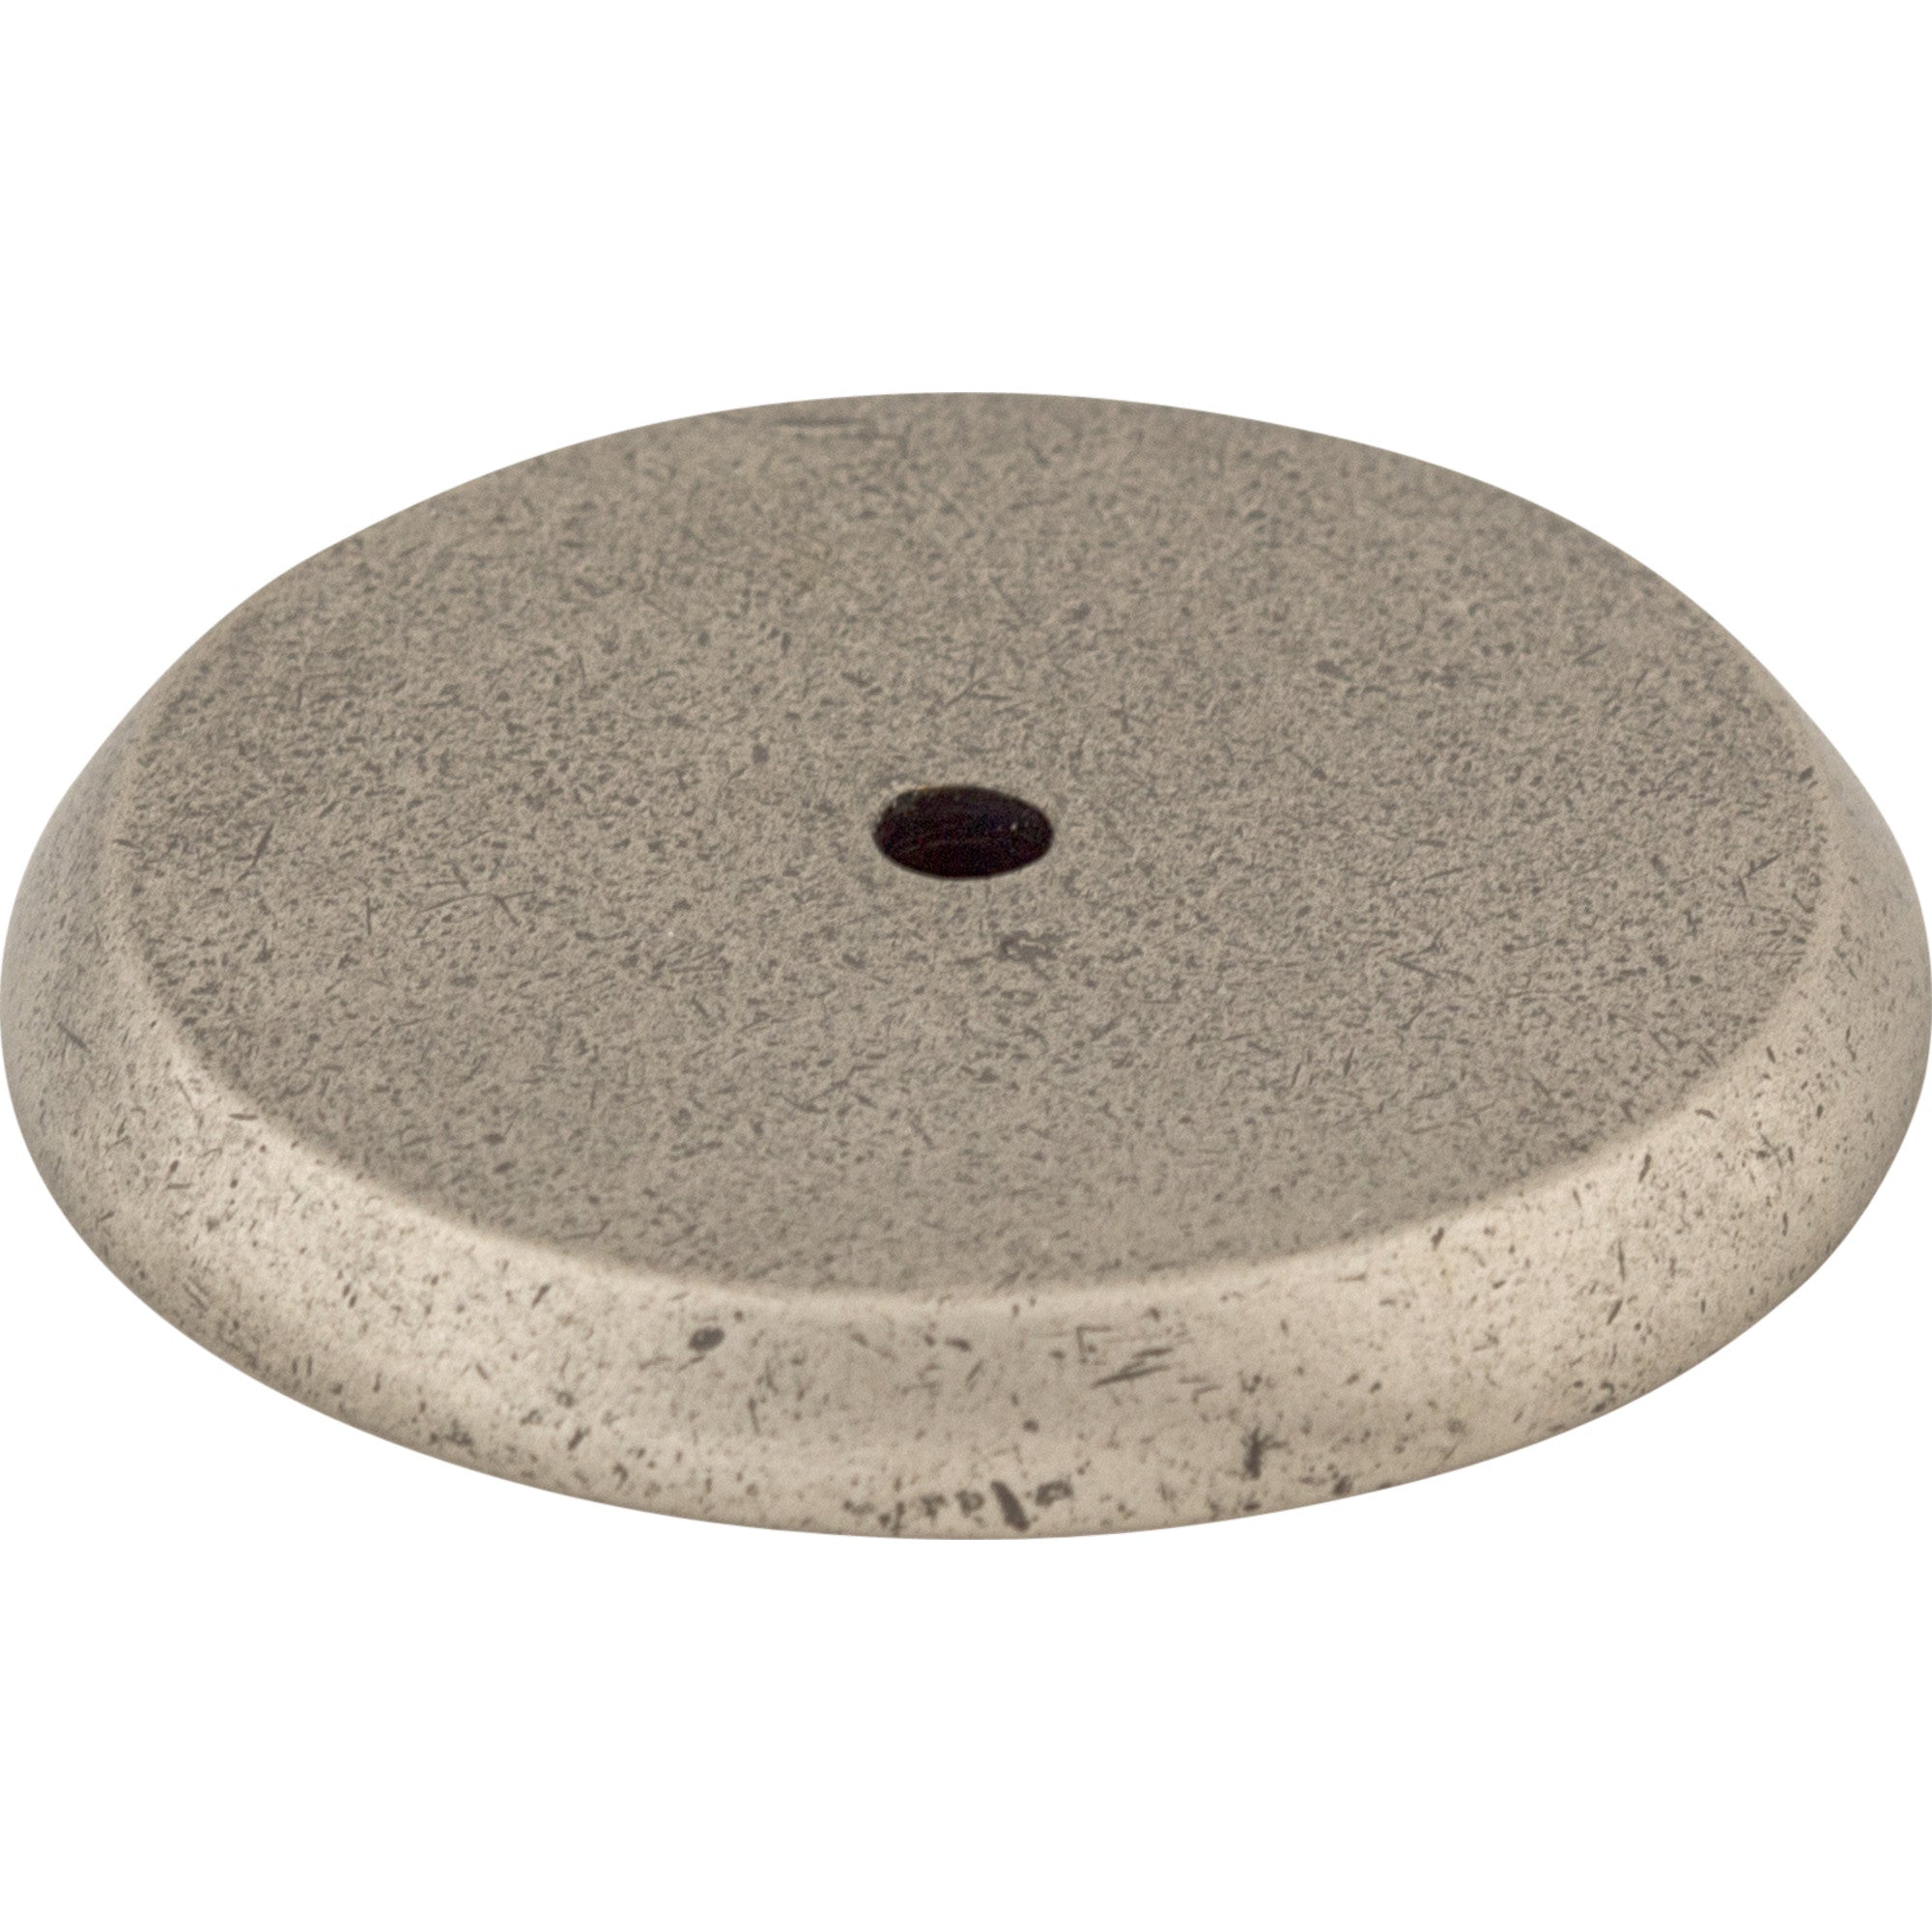 Top Knobs - Hardware - Aspen Round Backplate - Brushed Bronze - Union Lighting Luminaires Décor